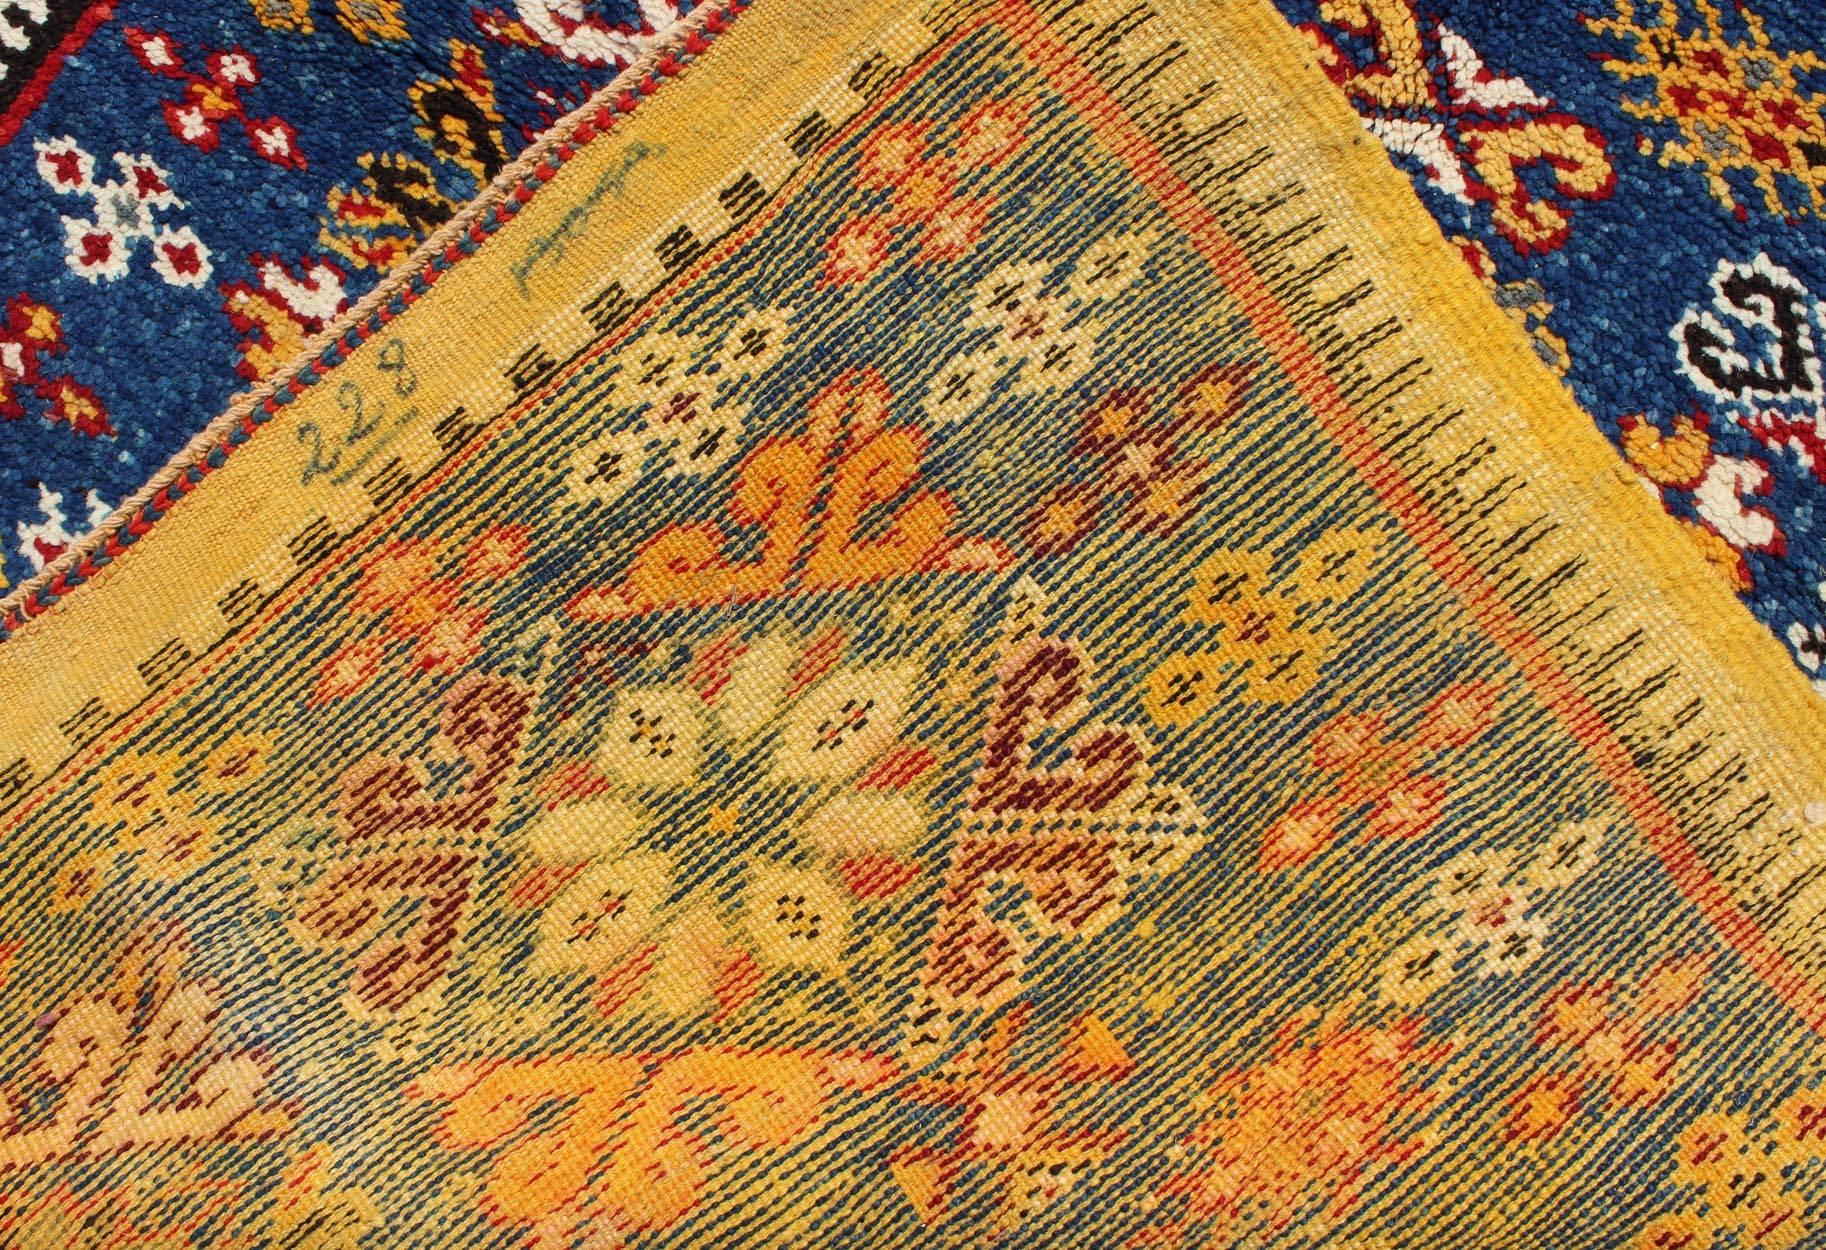 Vintage Moroccan Rug with Bright Blue Field and Colorful Geometric Motifs 4